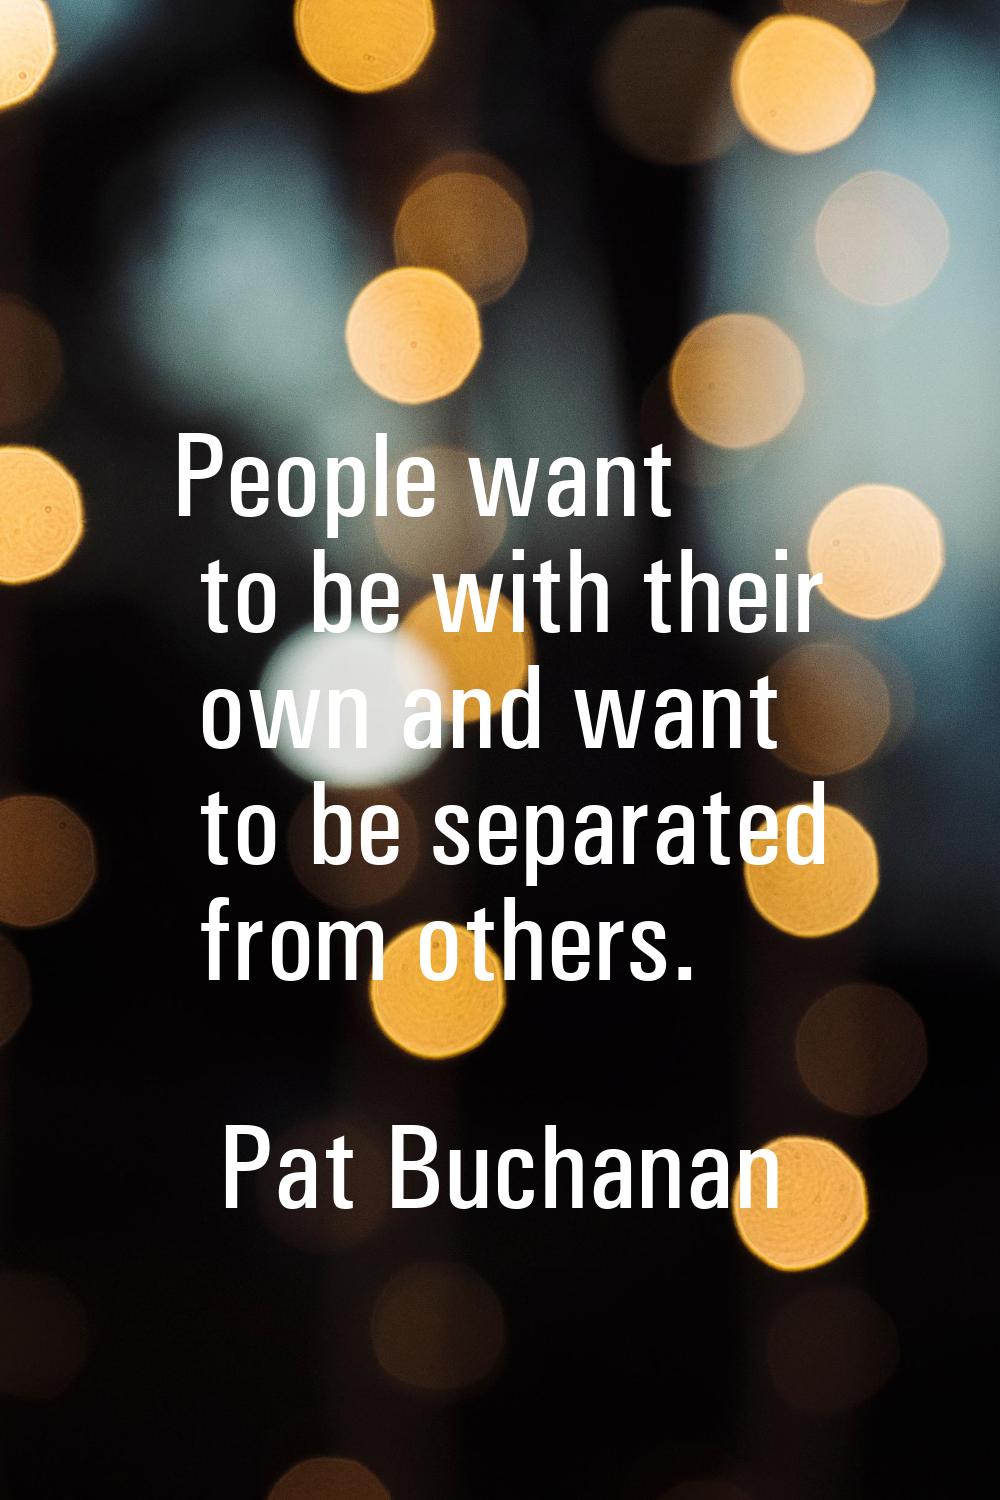 People want to be with their own and want to be separated from others.